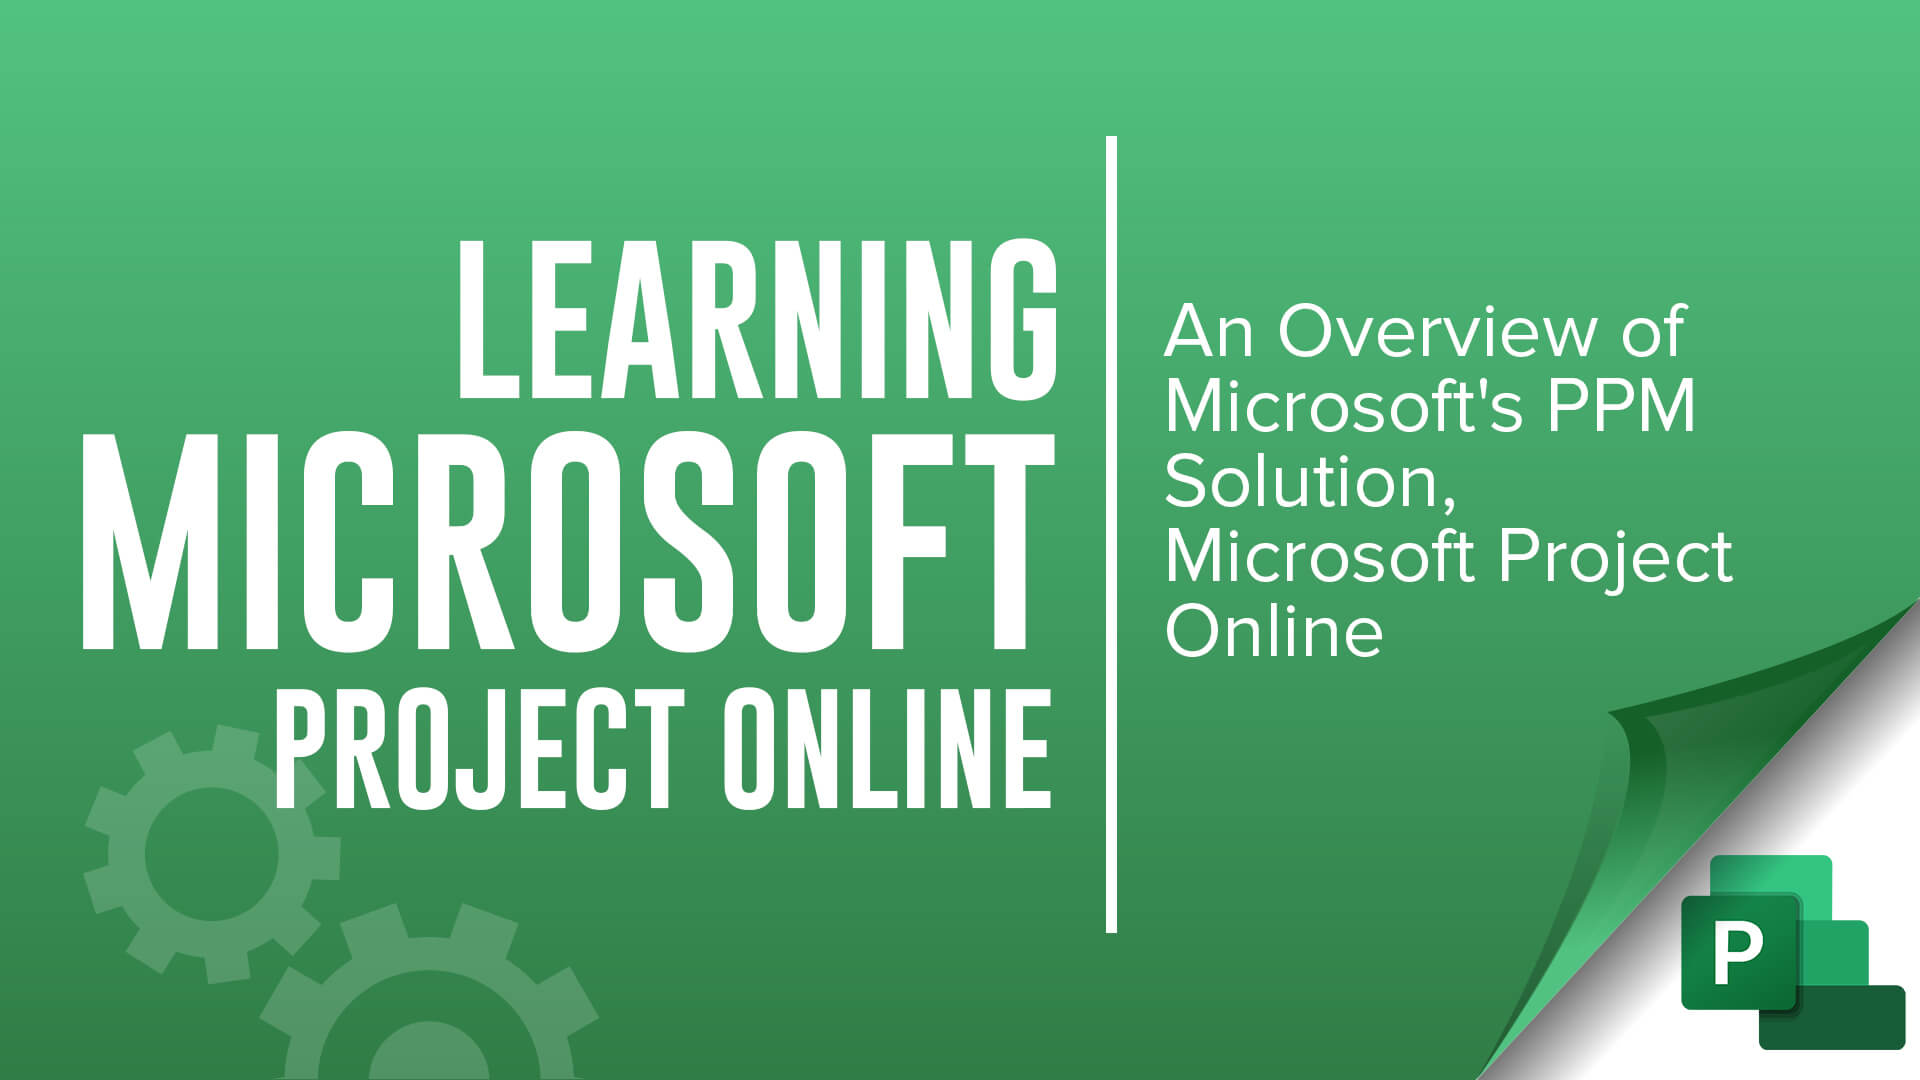 learning Microsoft Project Online - An Overview of Microsoft's PPM Solution, Microsoft Project Online